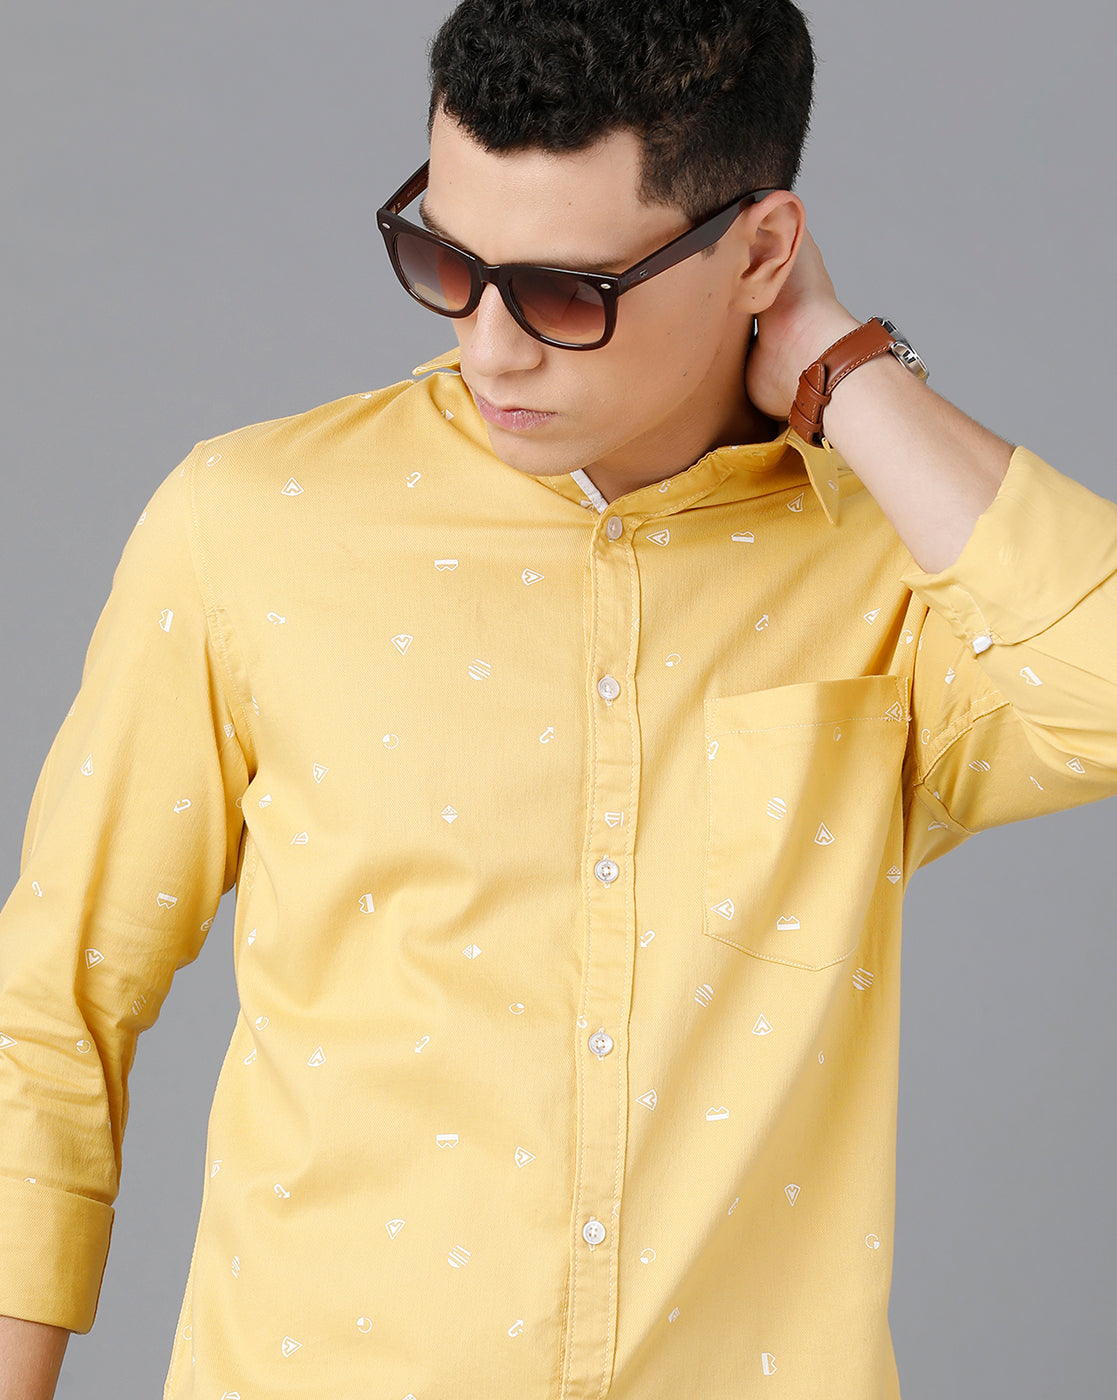 Classic Polo Mens Cotton Full Sleeve Printed Slim Fit Yellow Color Spr